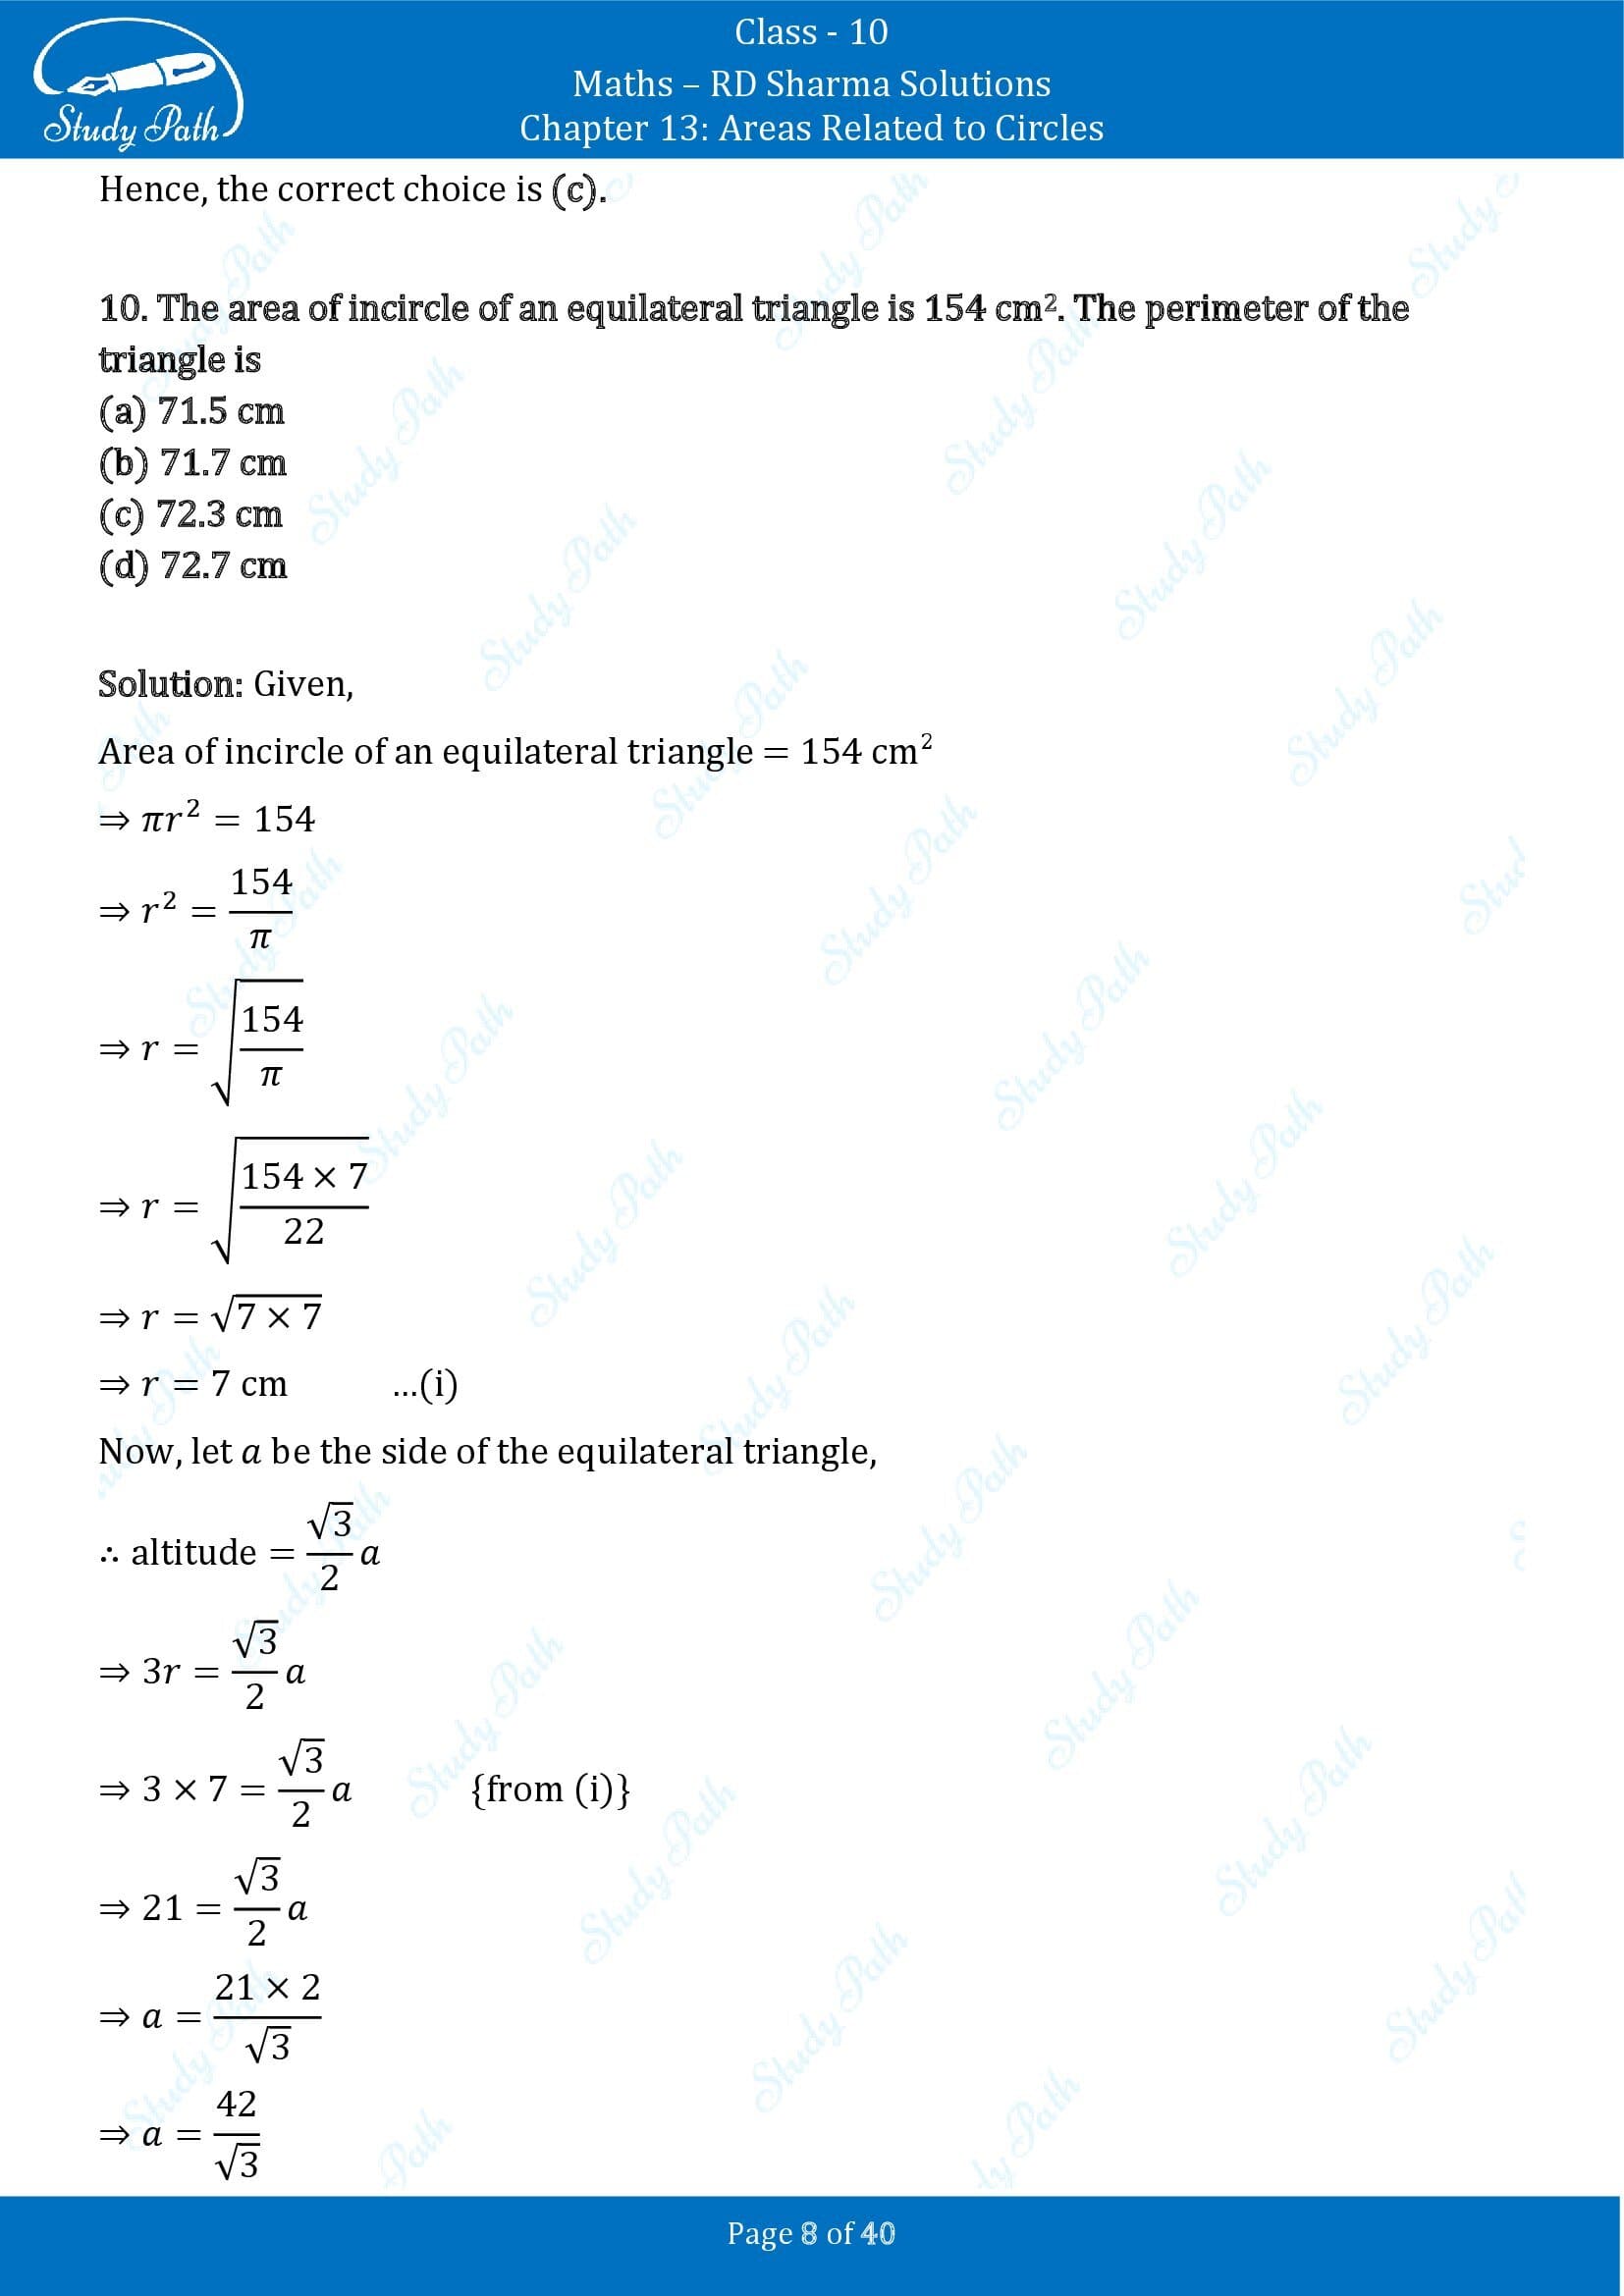 RD Sharma Solutions Class 10 Chapter 13 Areas Related to Circles Multiple Choice Question MCQs 00008